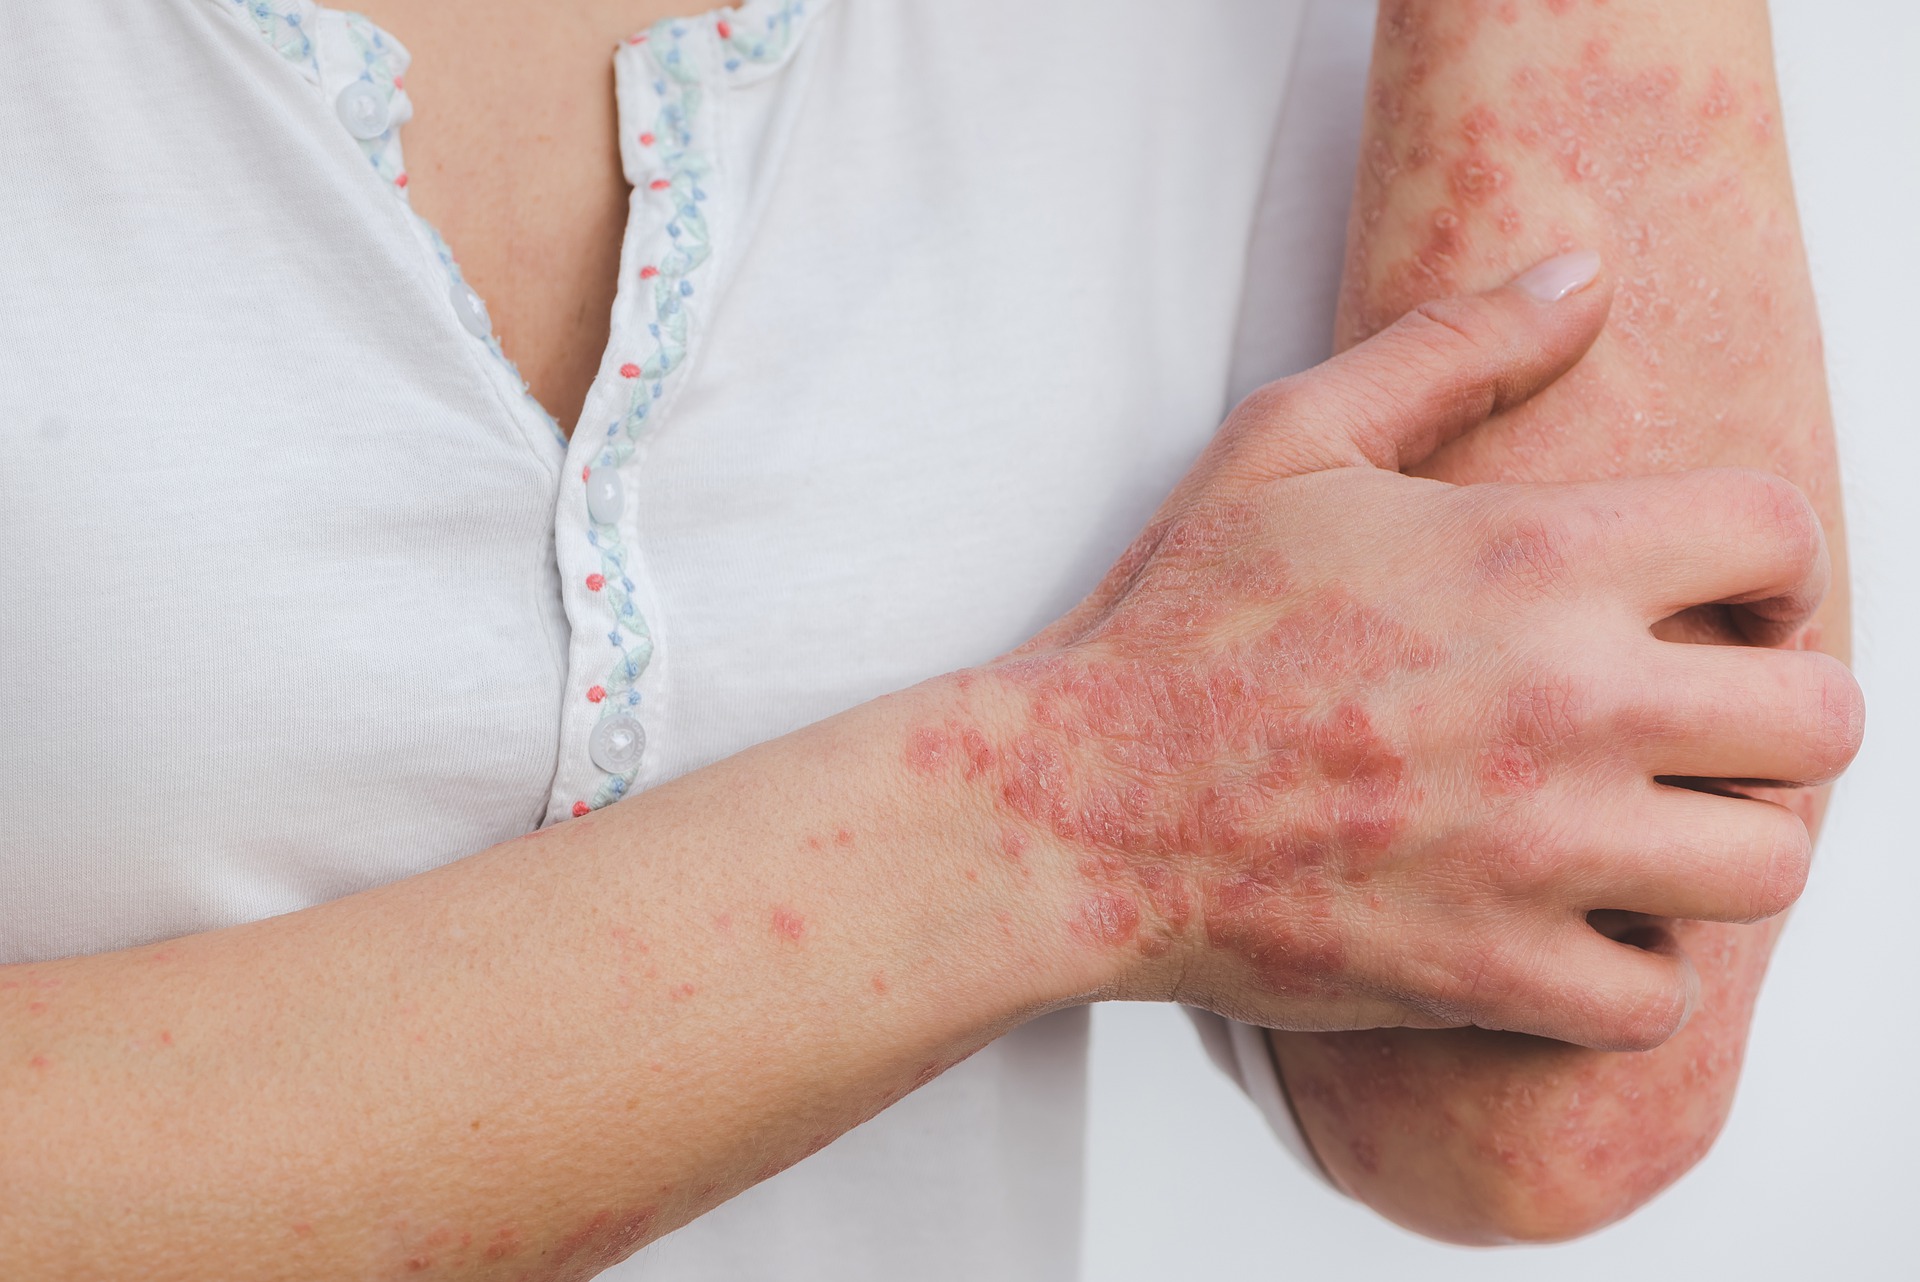 Psoriasis: The Best Diet To Reduce The Flare-Ups